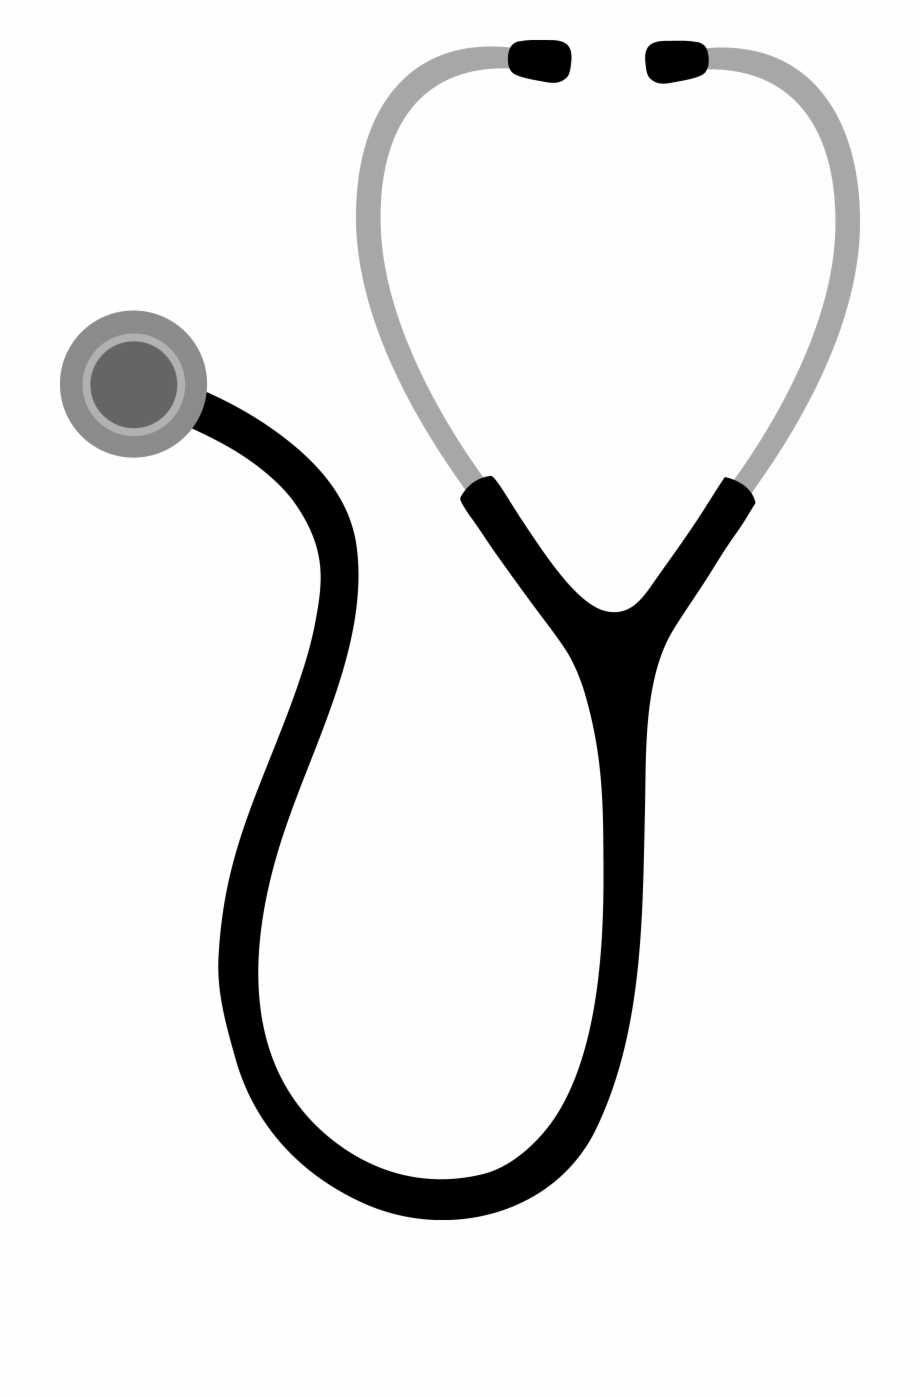 Free Stethoscope Clipart Transparent Background, Download